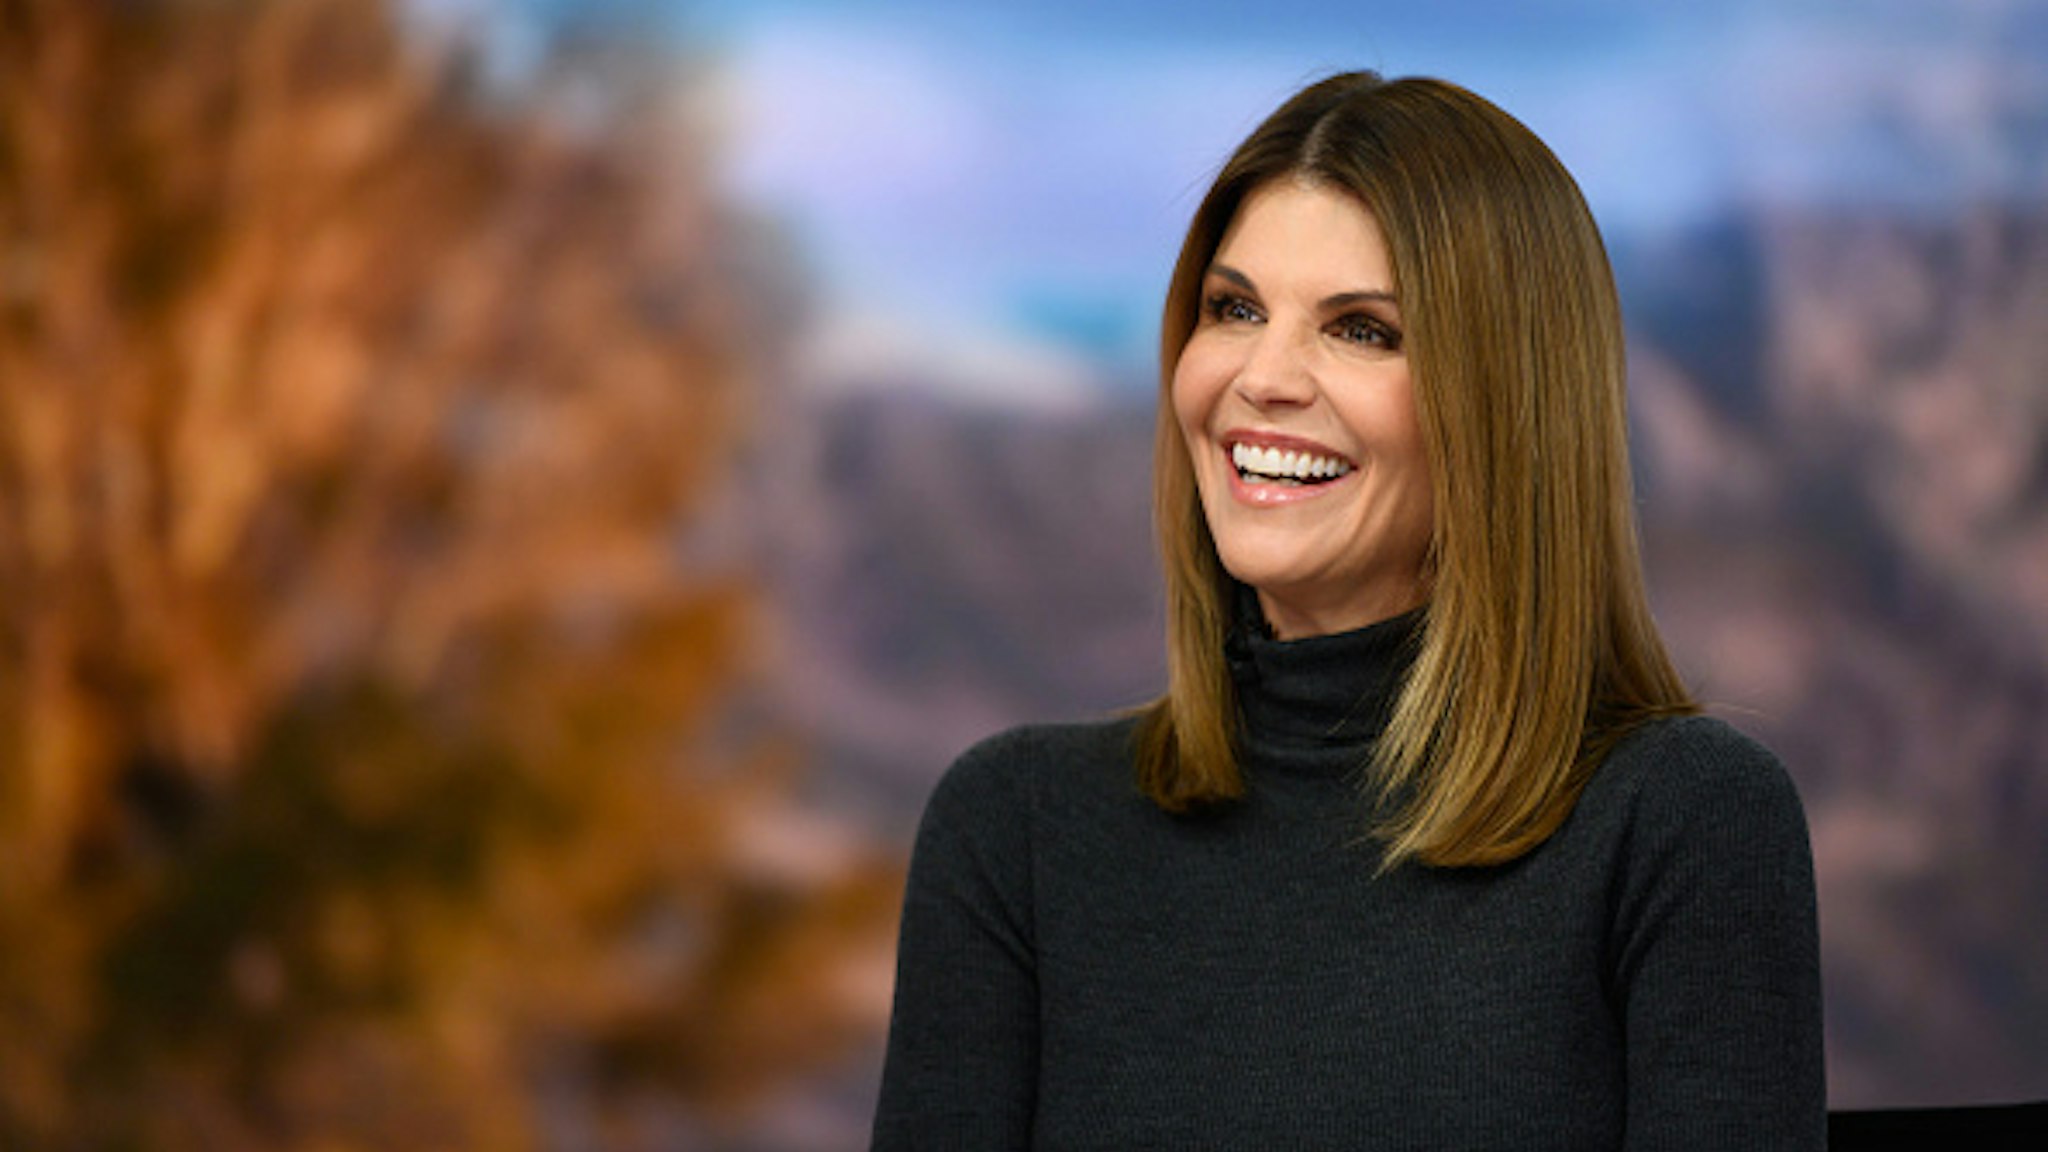 TODAY -- Pictured: Lori Loughlin on Thursday, February 14, 2019 --